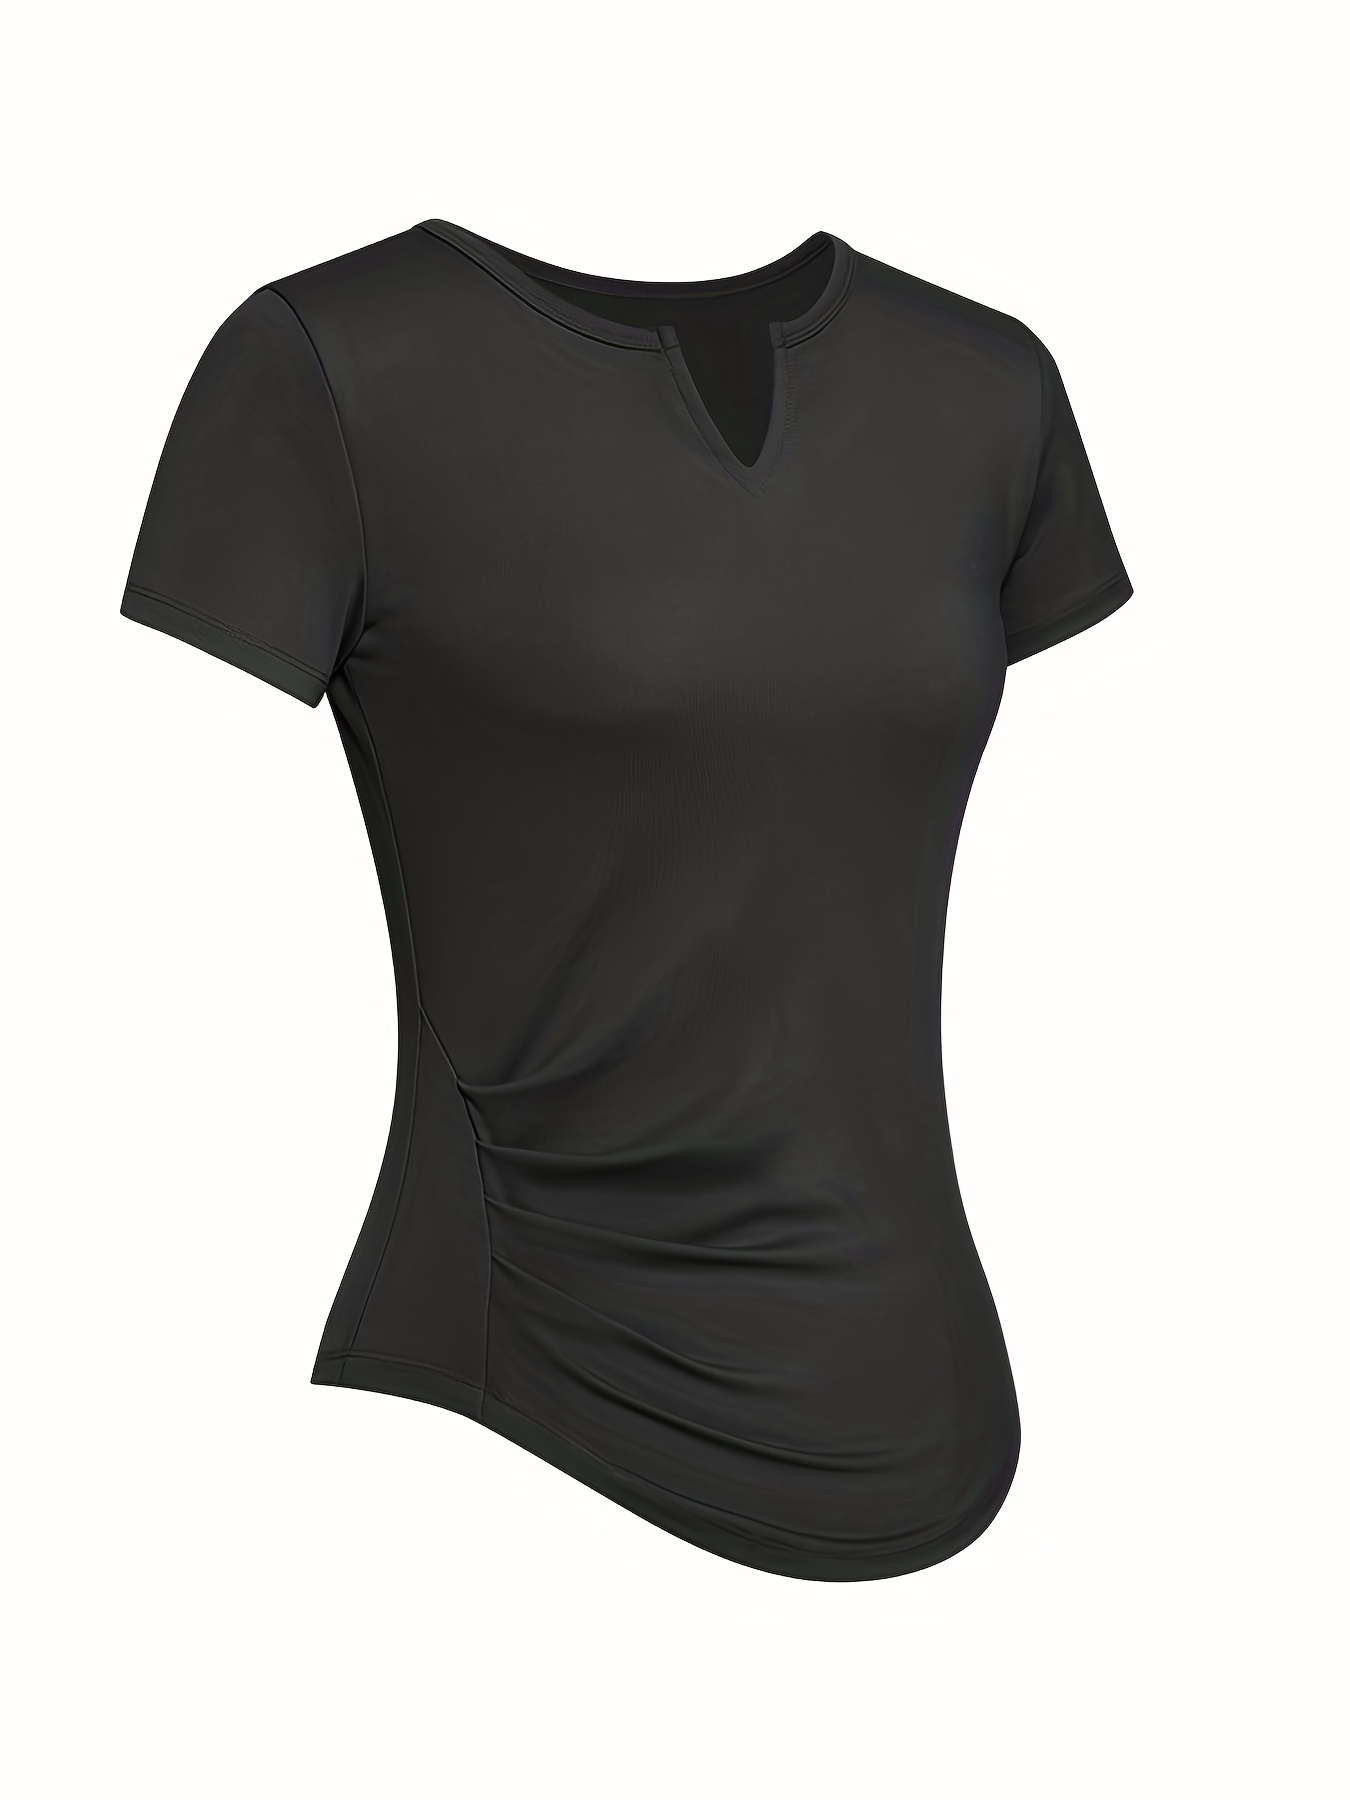 women athletic t-shirt Color Black Size Small